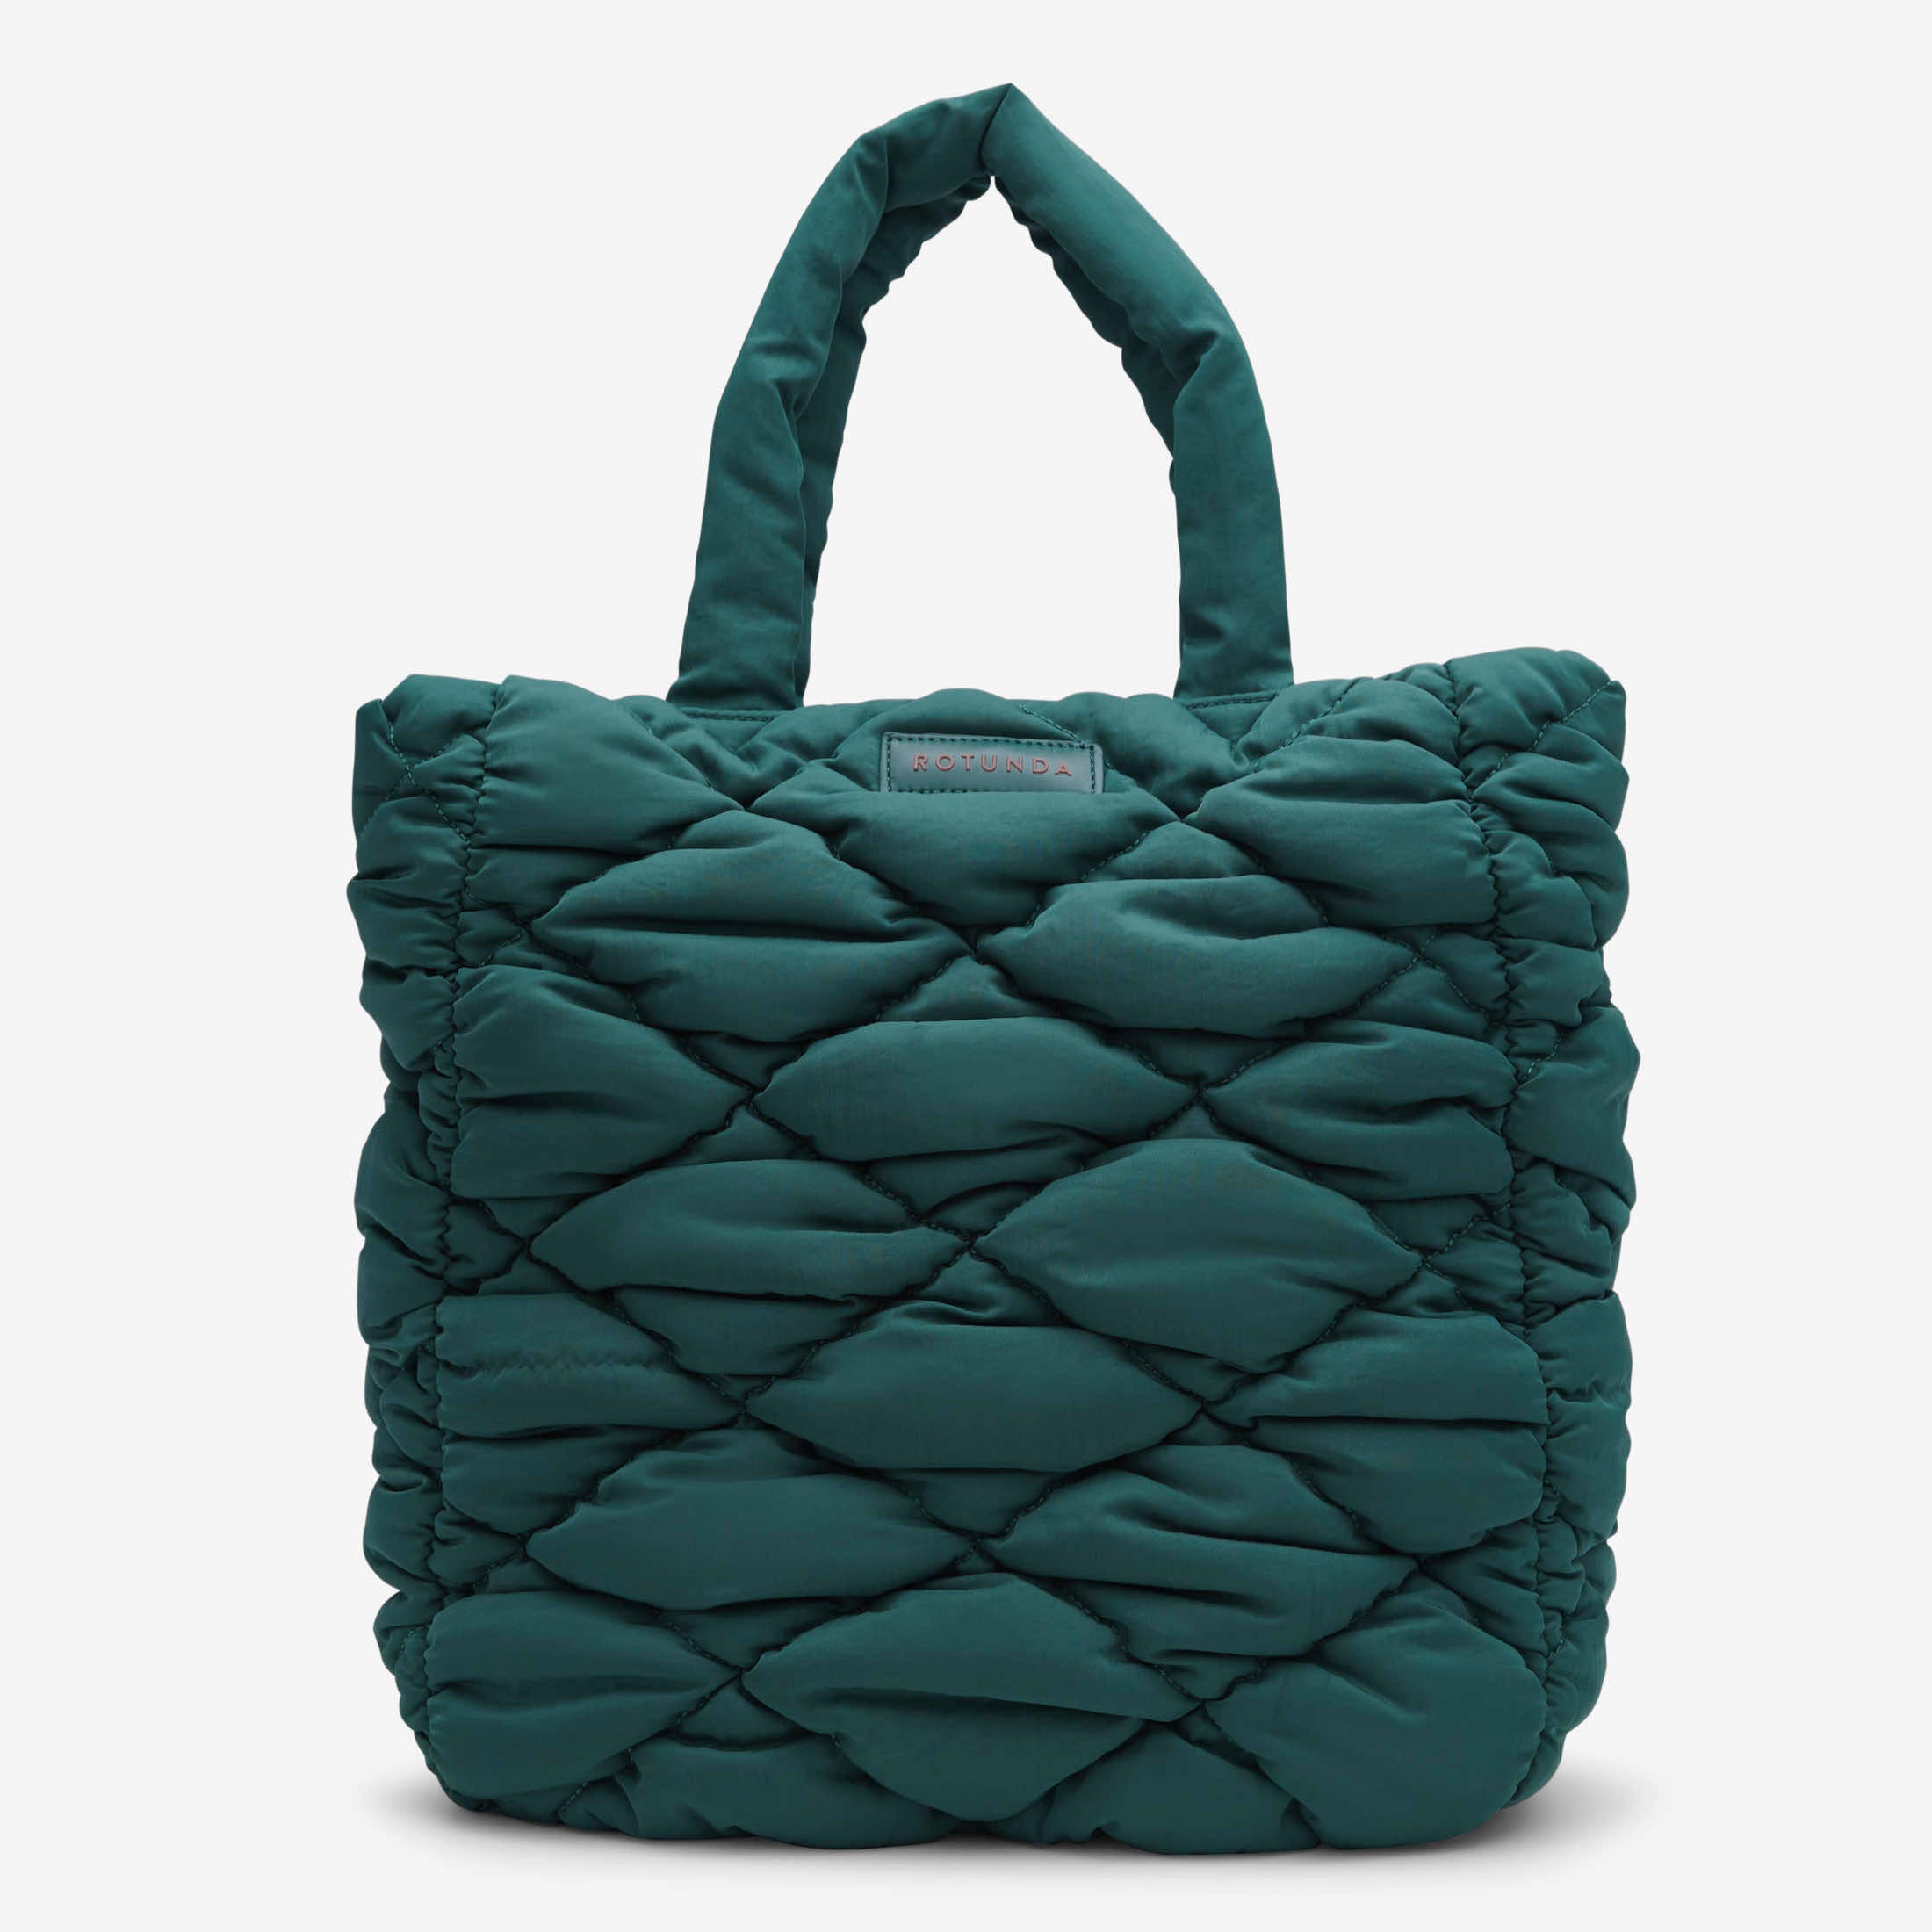 Daira Fluffy Tote Teal